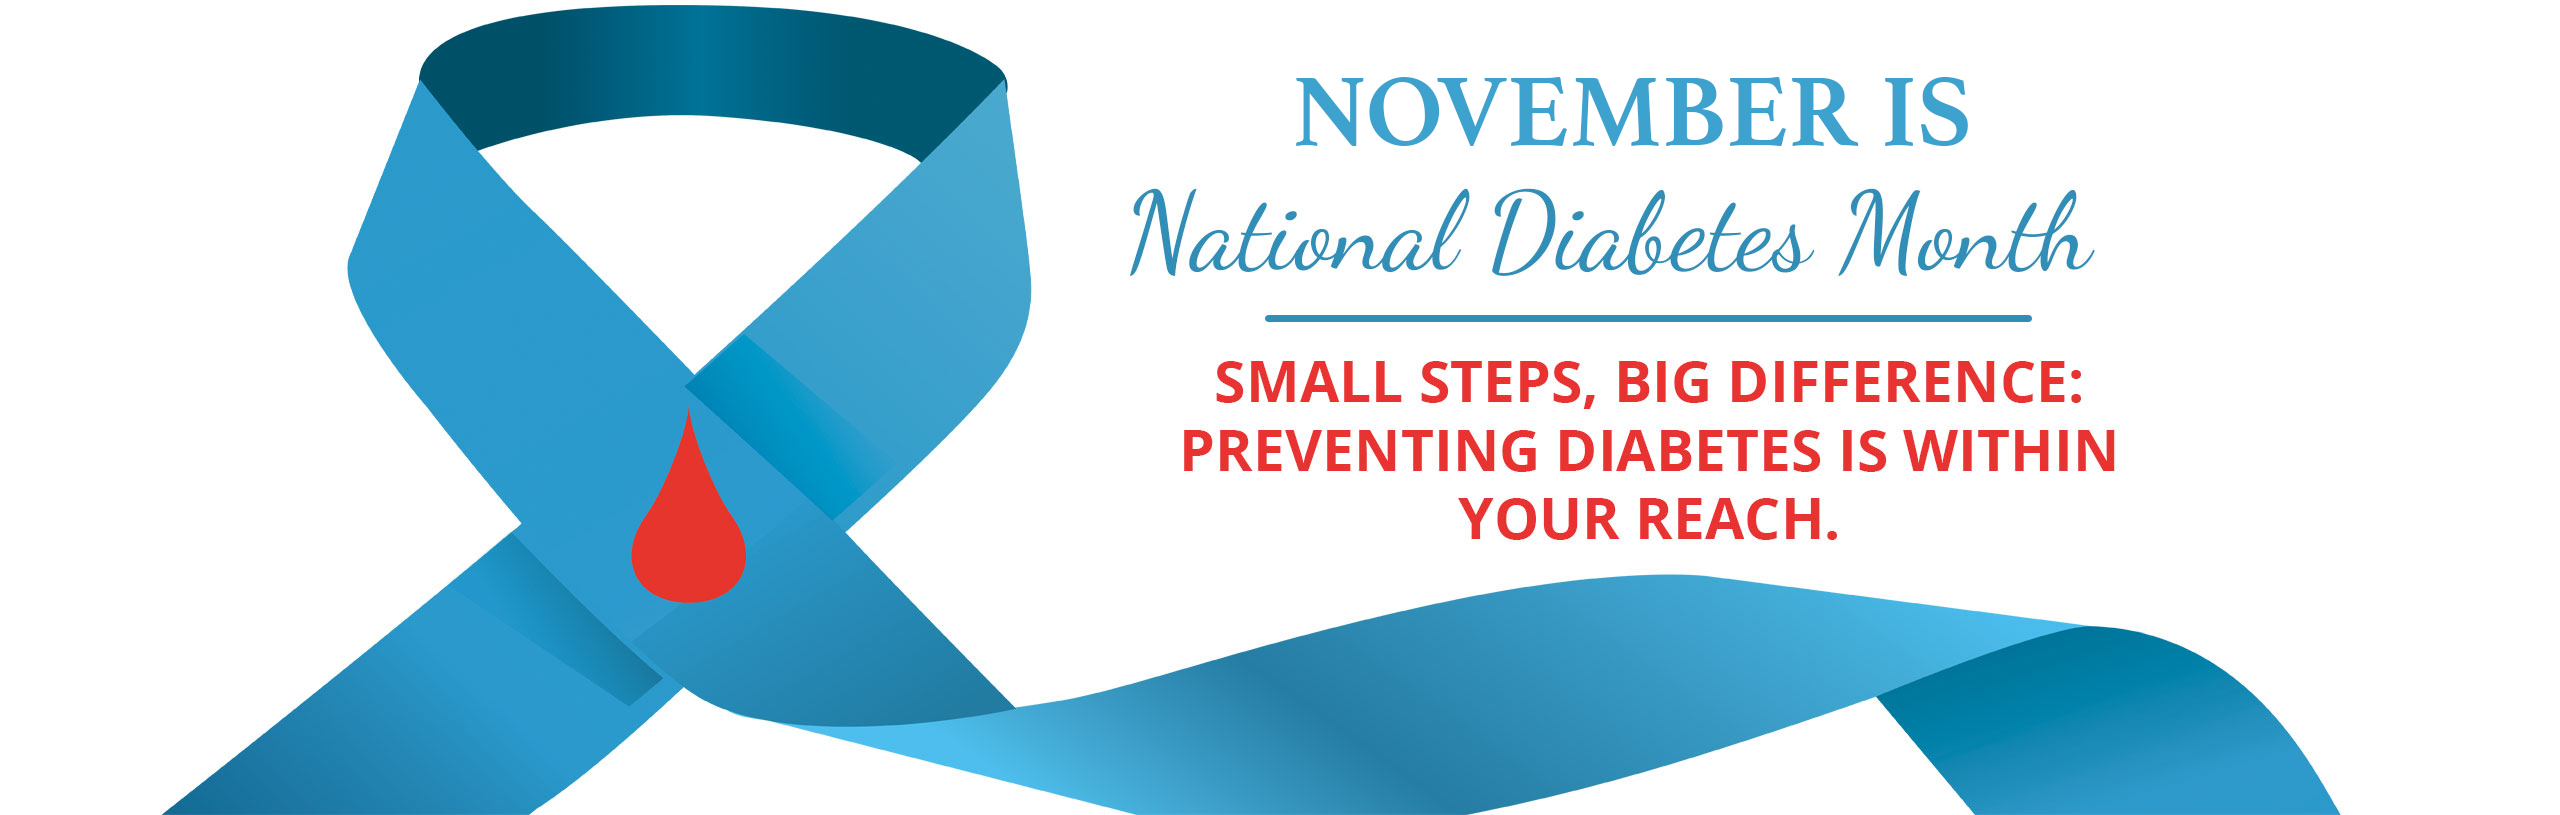 NOVEMBER IS 
National Diabetes Month

SMALL STEPS, BIG DIFFERENCE:
PREVENTING DIABETES IS WITHIN YOUR REACH